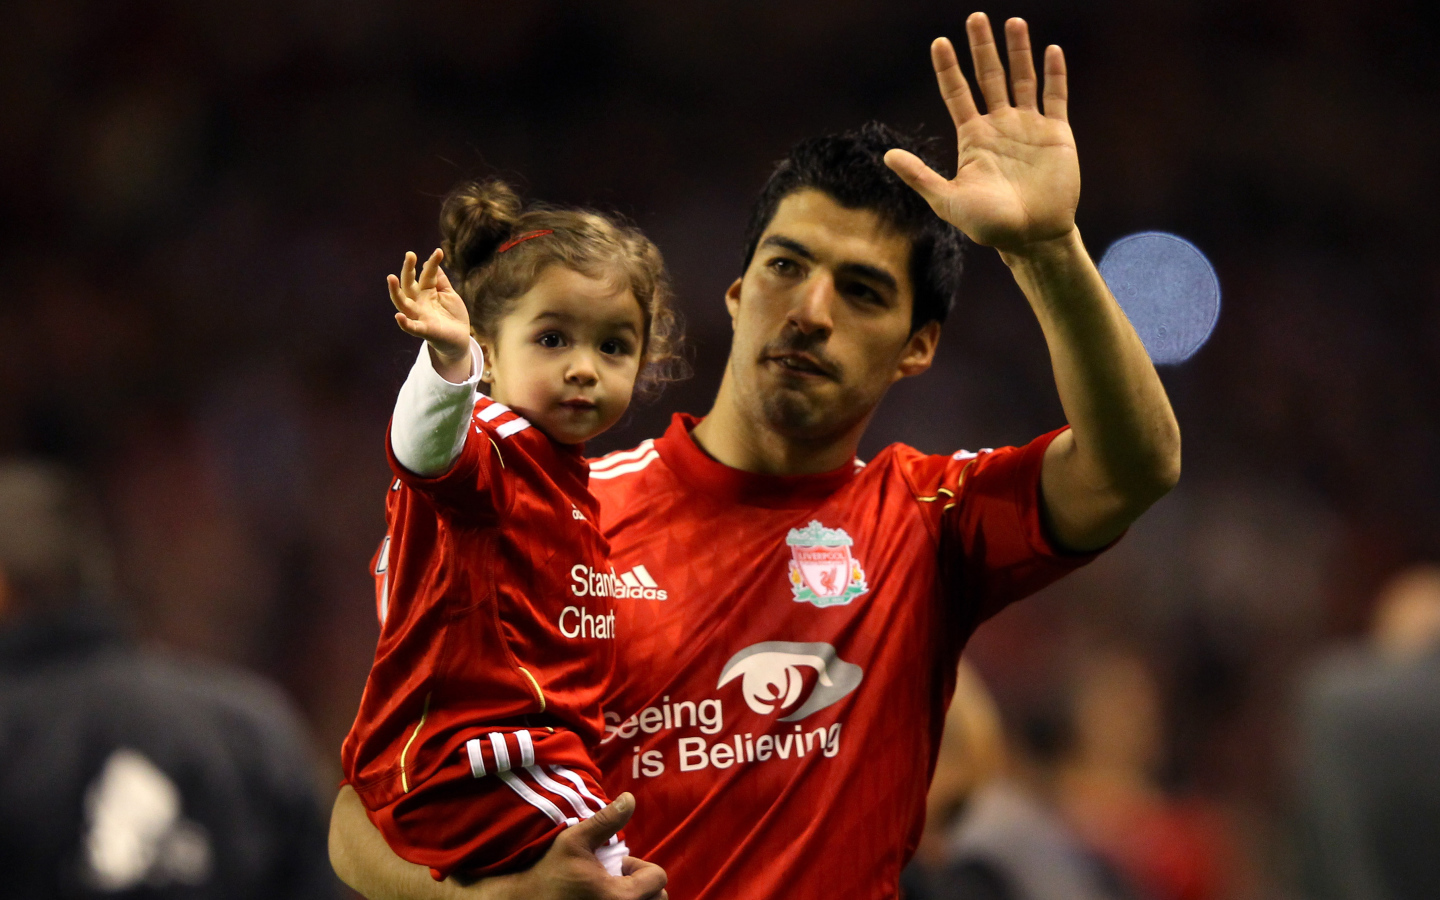 The best player of Liverpool Luis Suarez